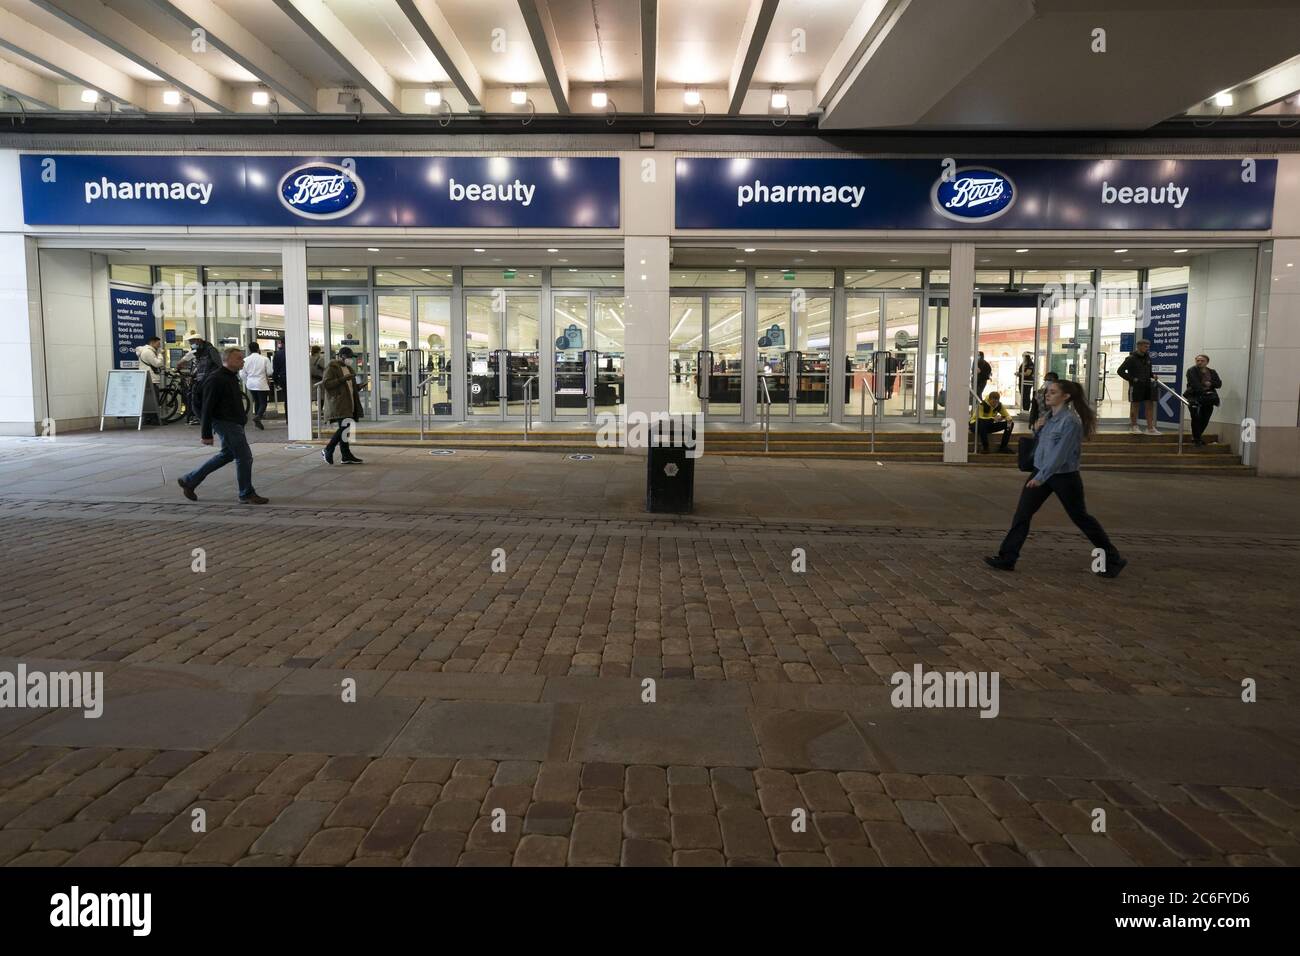 Manchester, Britain. 9th July, 2020. People walk past a Boots store in Manchester, Britain, on July 9, 2020. British high street pharmacy chain Boots announced Thursday that it will cut more than 4,000 jobs and close 48 opticians stores in an attempt to mitigate the significant impact caused by the COVID-19 pandemic. Credit: Jon Super/Xinhua/Alamy Live News Stock Photo